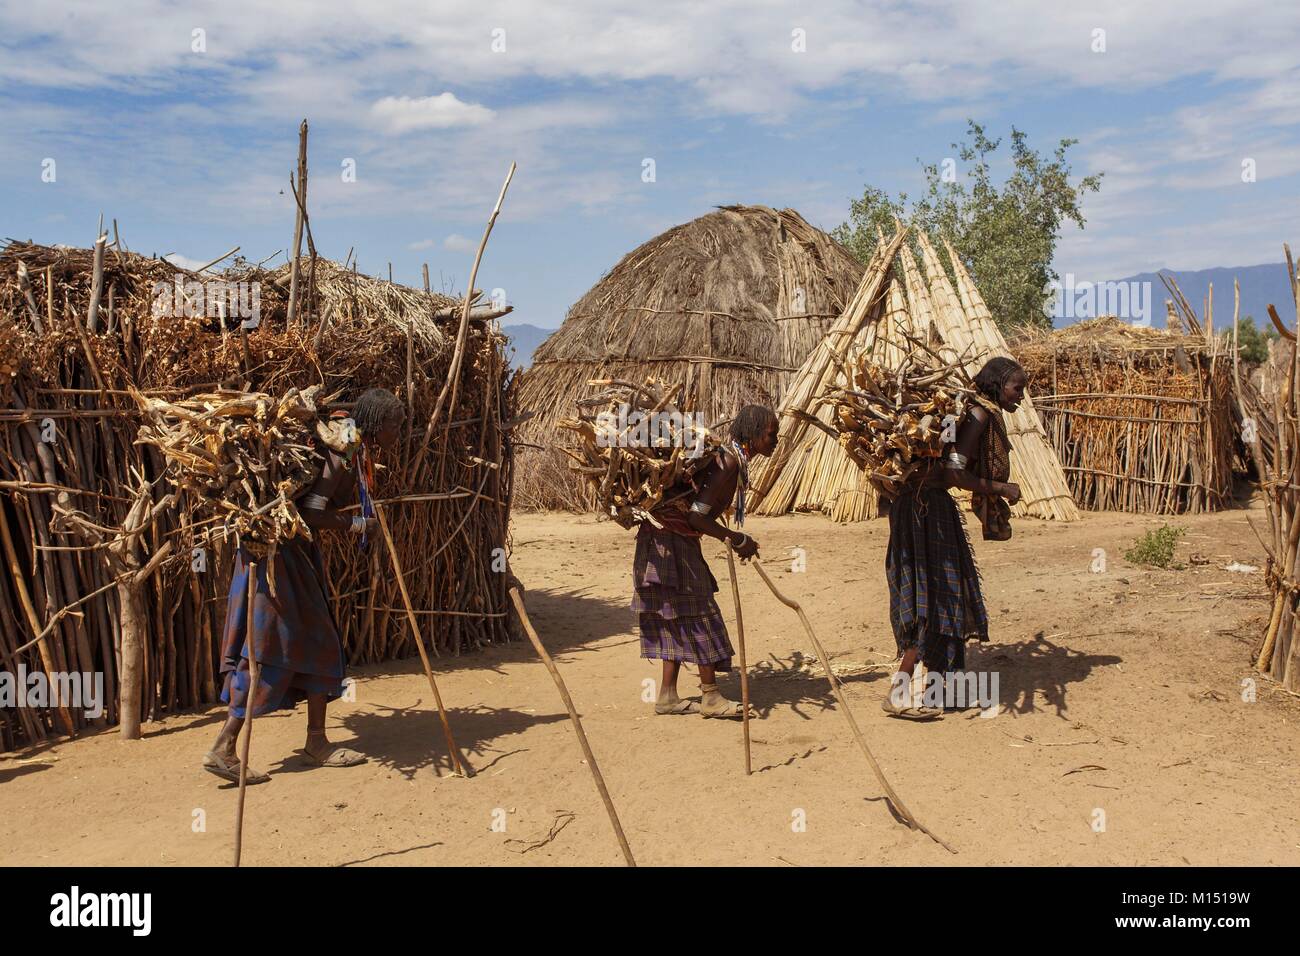 Ethiopia, Lower Omo Valley listed as World Heritage by UNESCO, Erbore tribe, The huts Erbore are made of papyrus, Women bring back bundles of wood Stock Photo